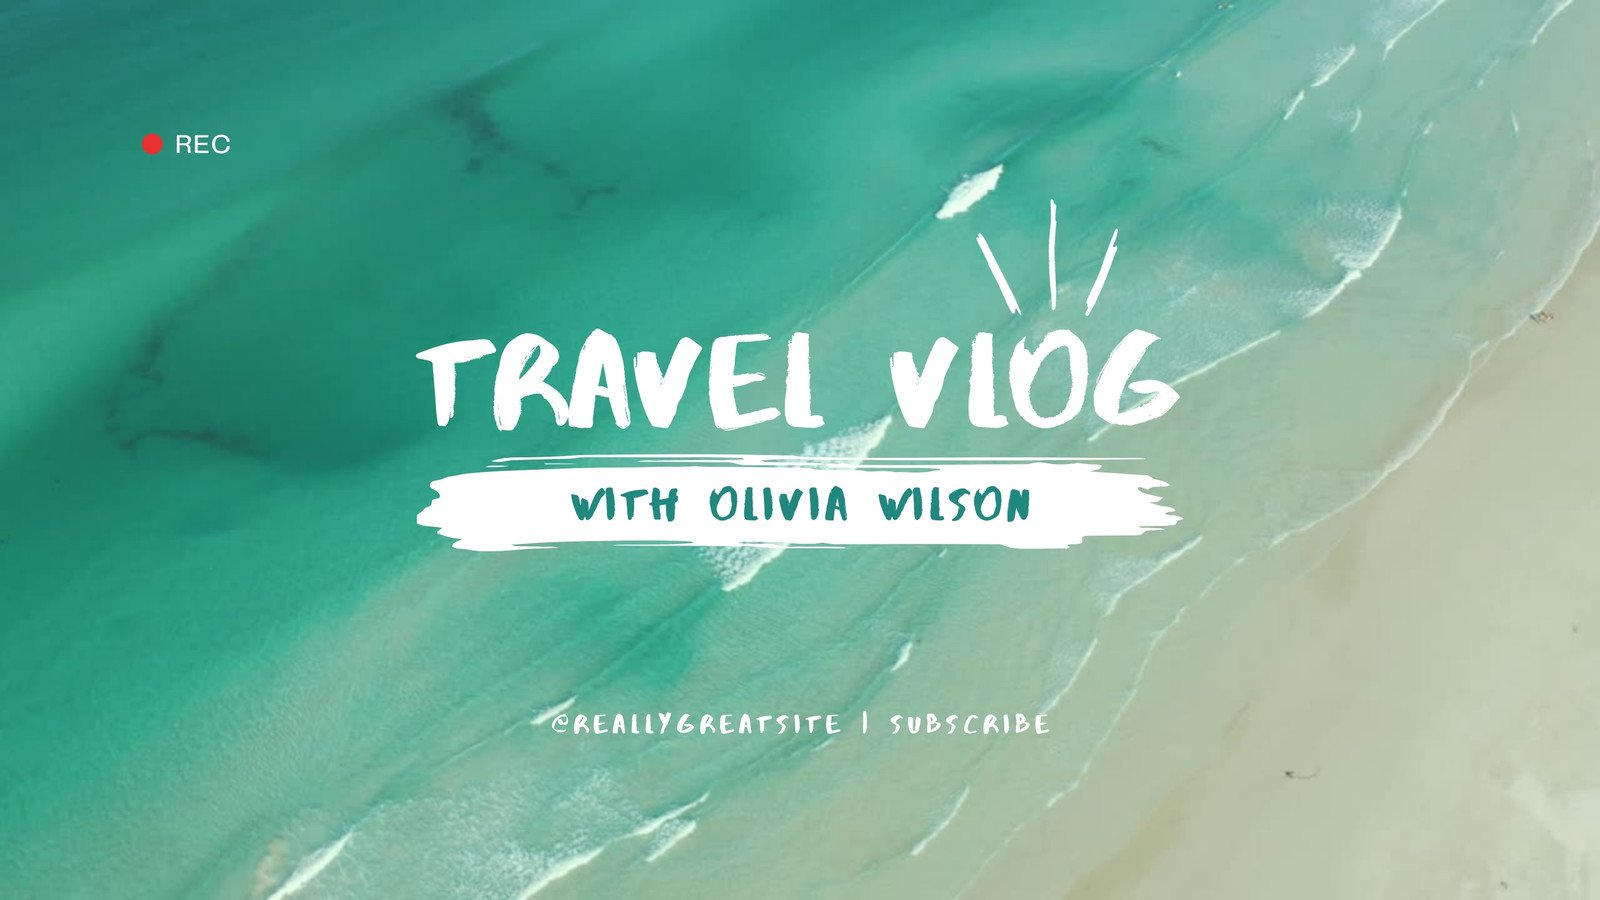 Free, customizable video templates for your channel | Canva